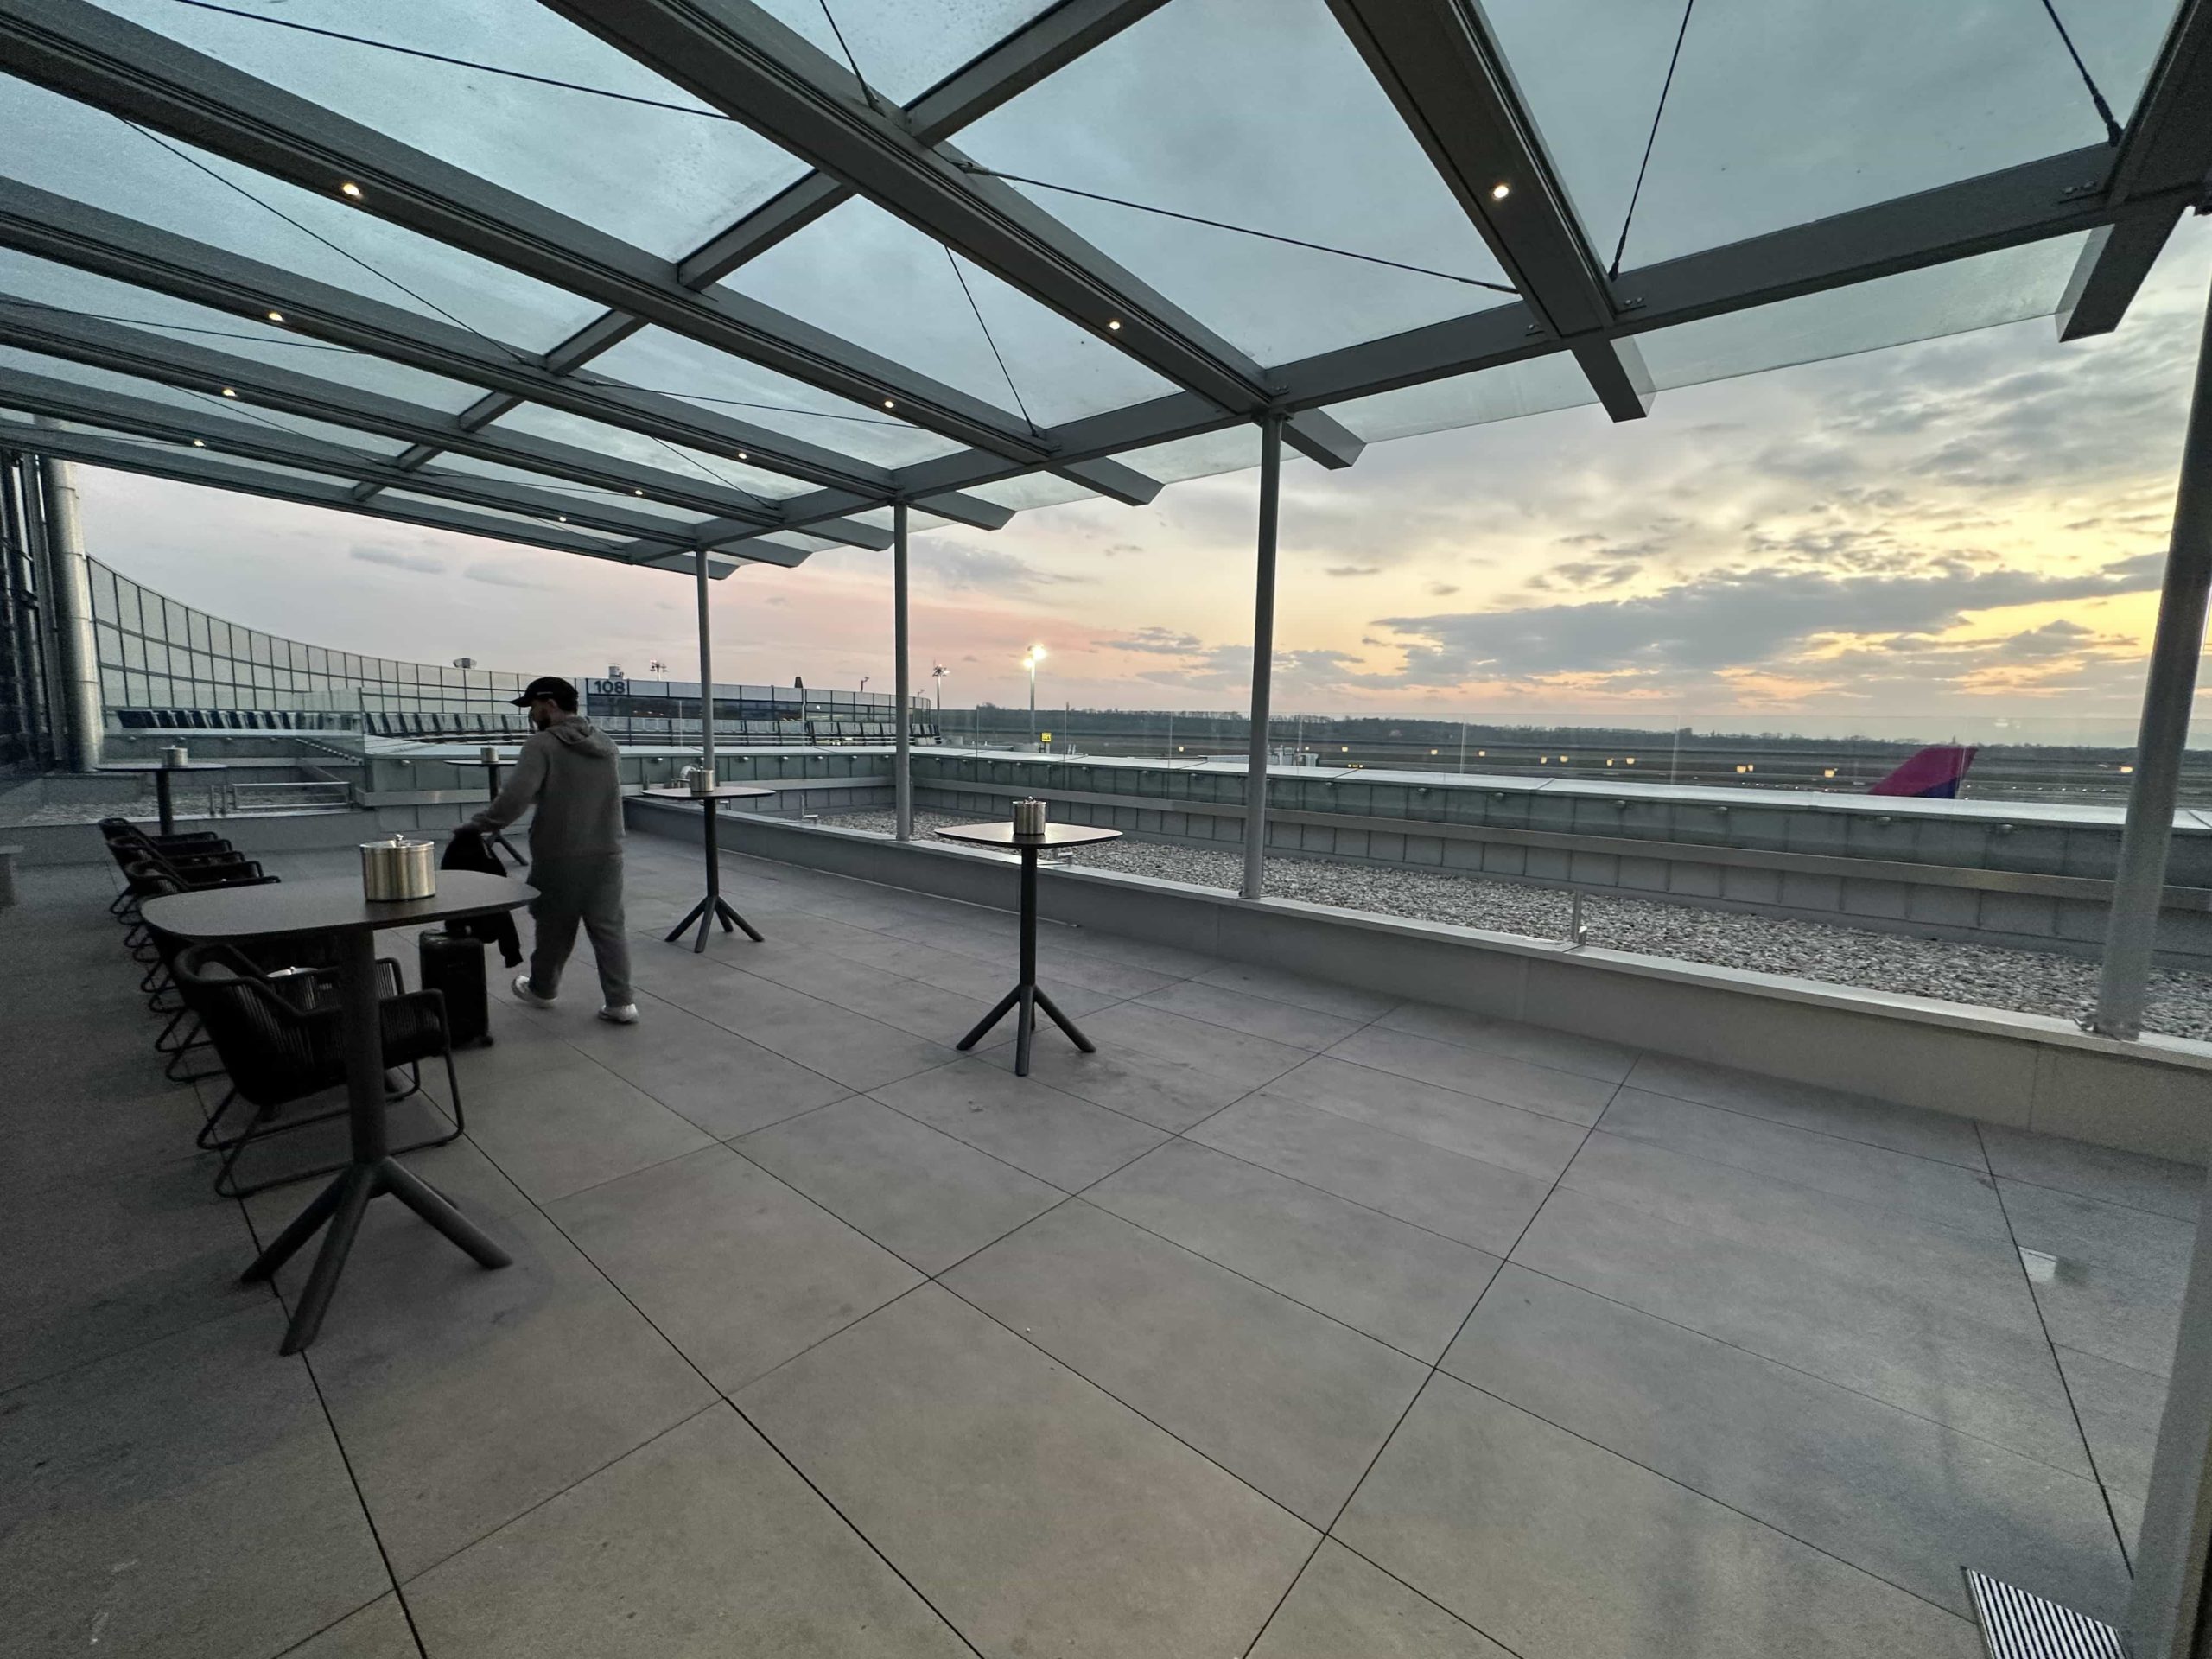 A basic, covered terrace, adjoining an airport lounge, with views over the airfield